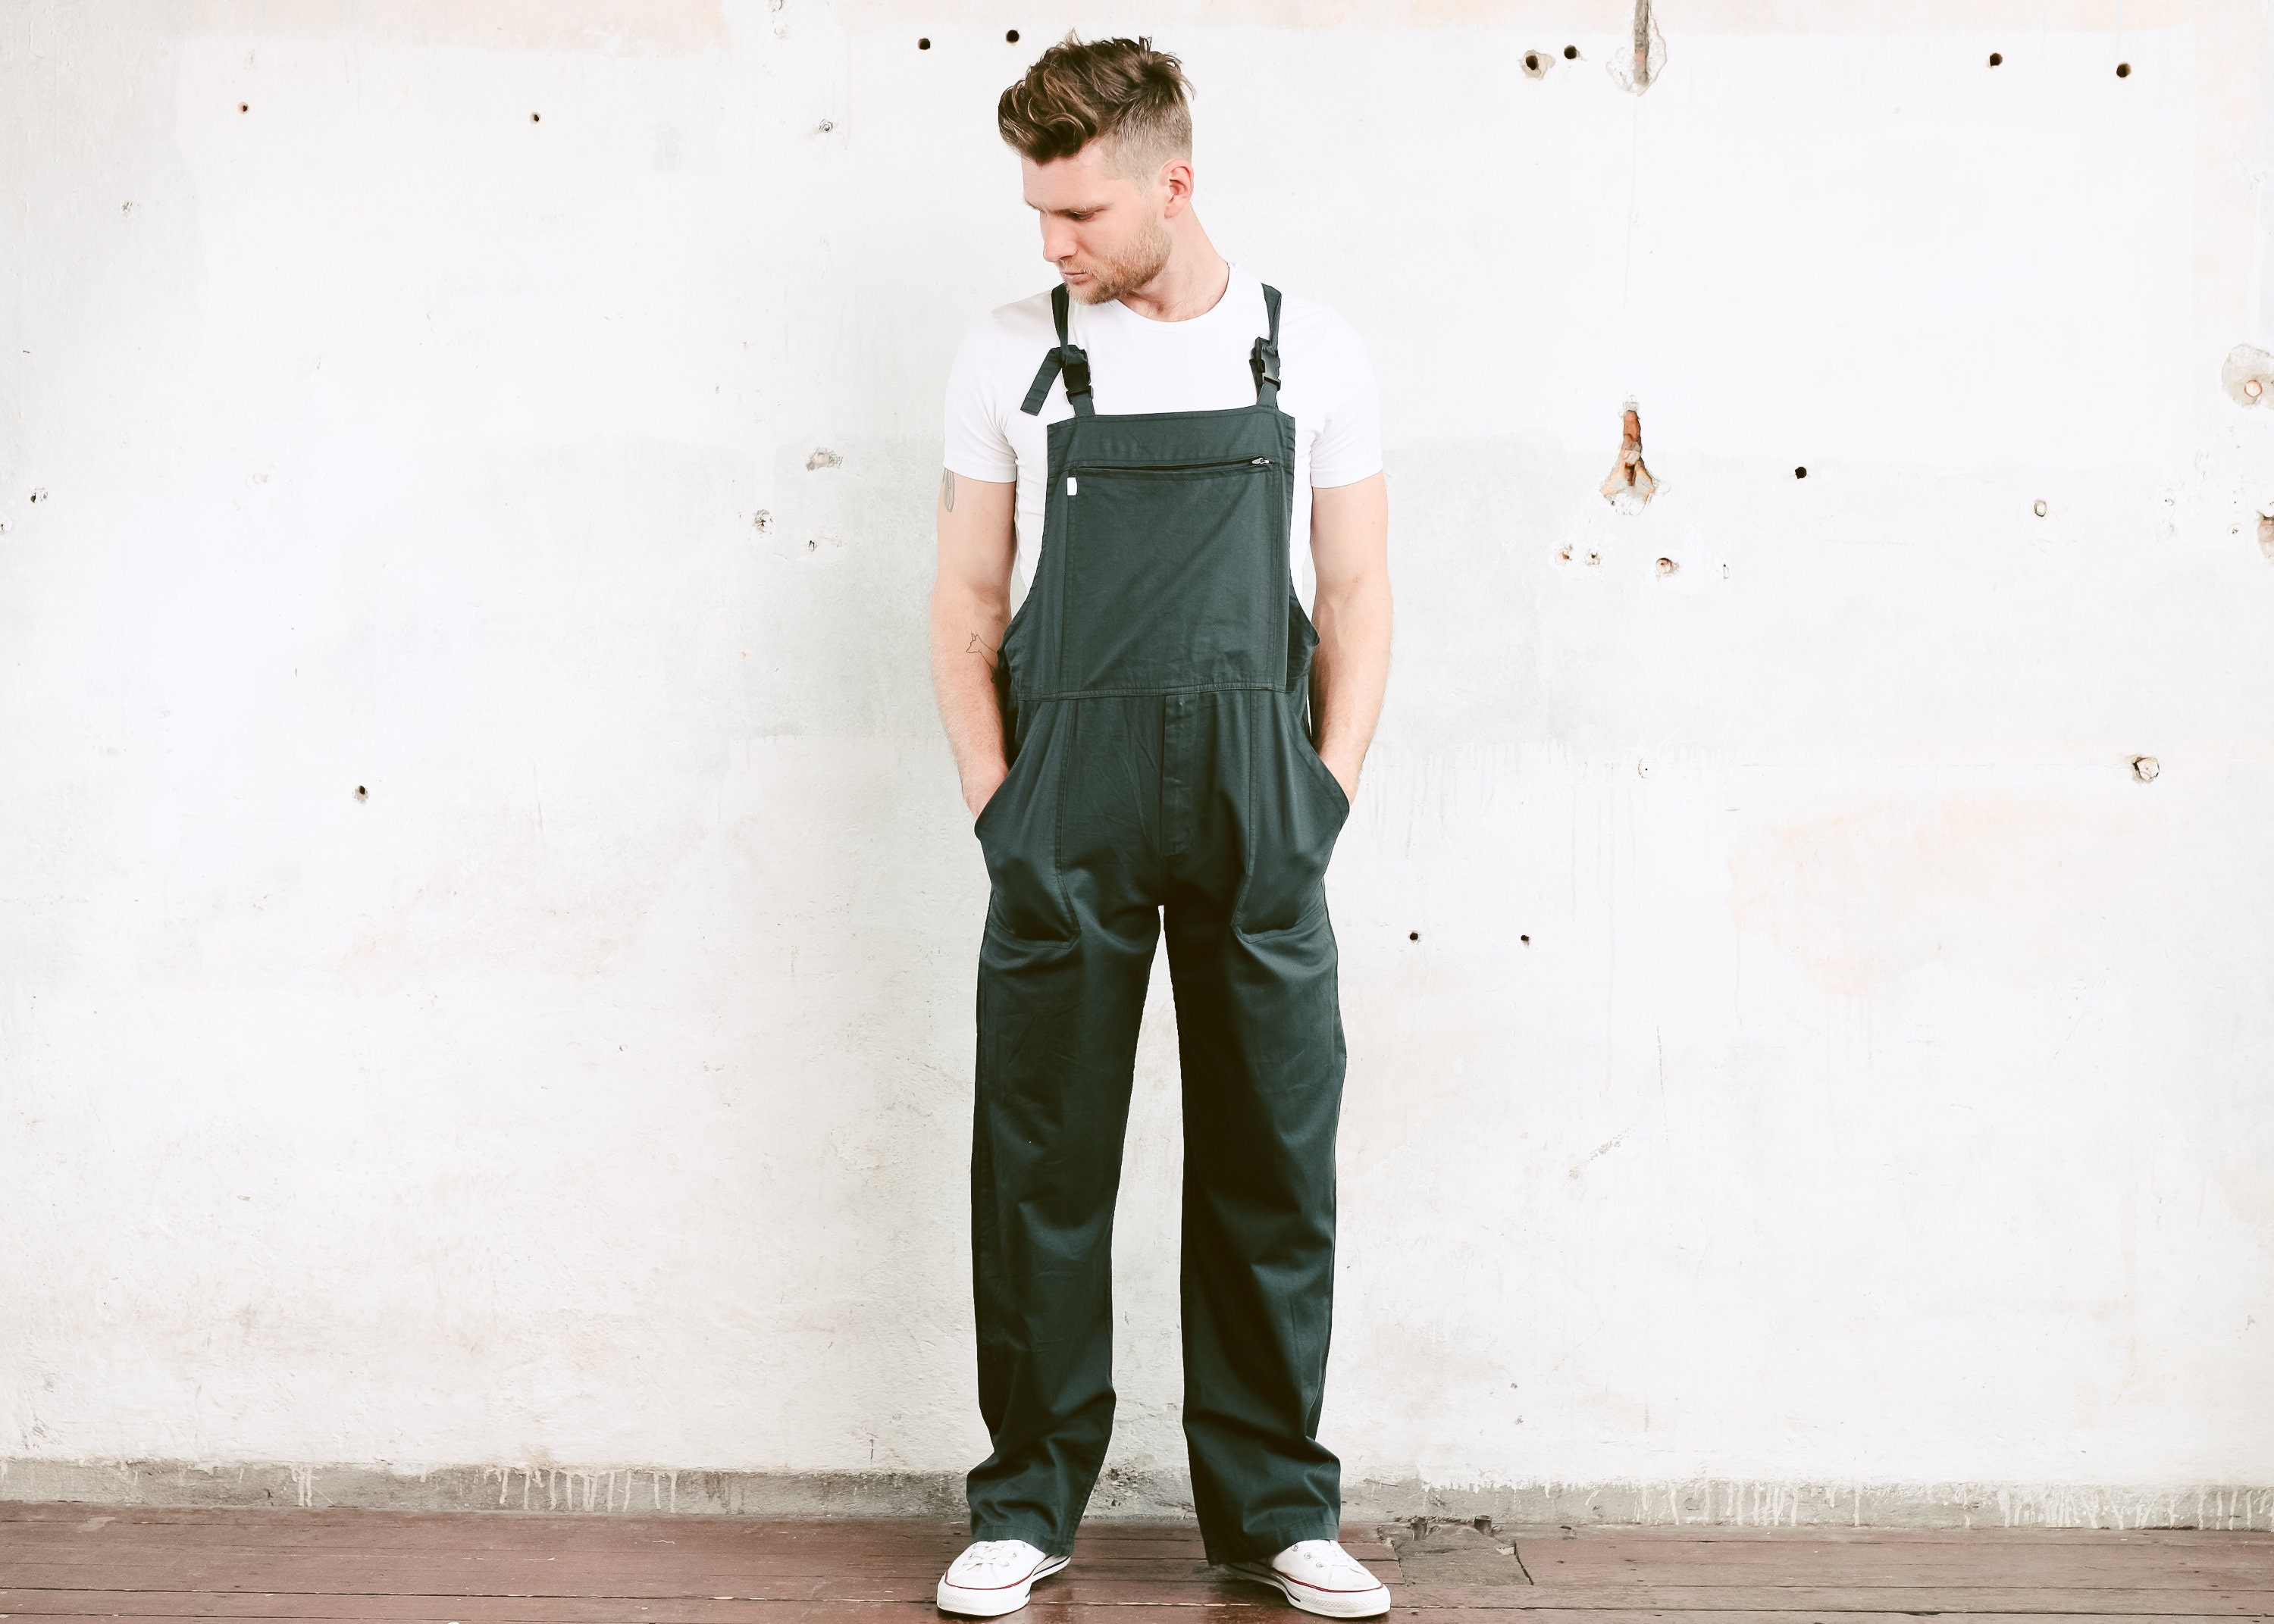 We are Generation Jumpsuit — That's Not My Age